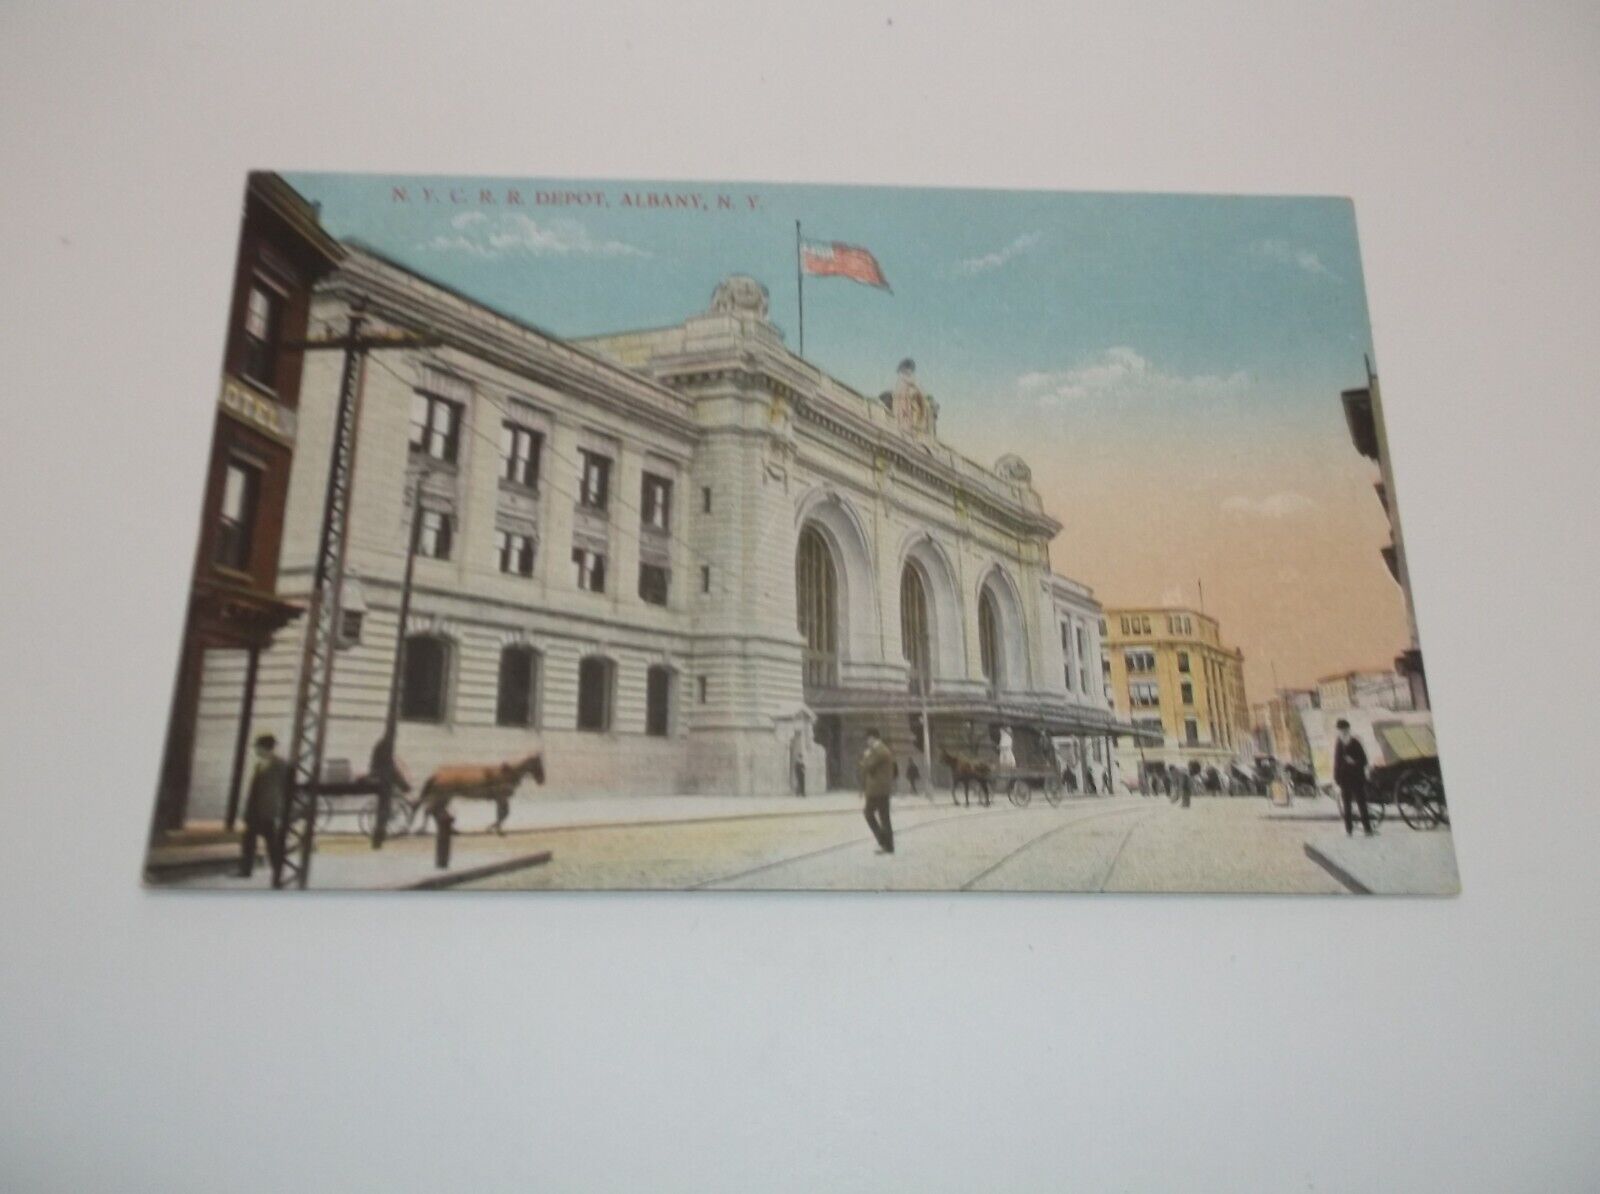 1908 ALBANY NEW YORK UNION STATION POST CARD NYC B&A D&H